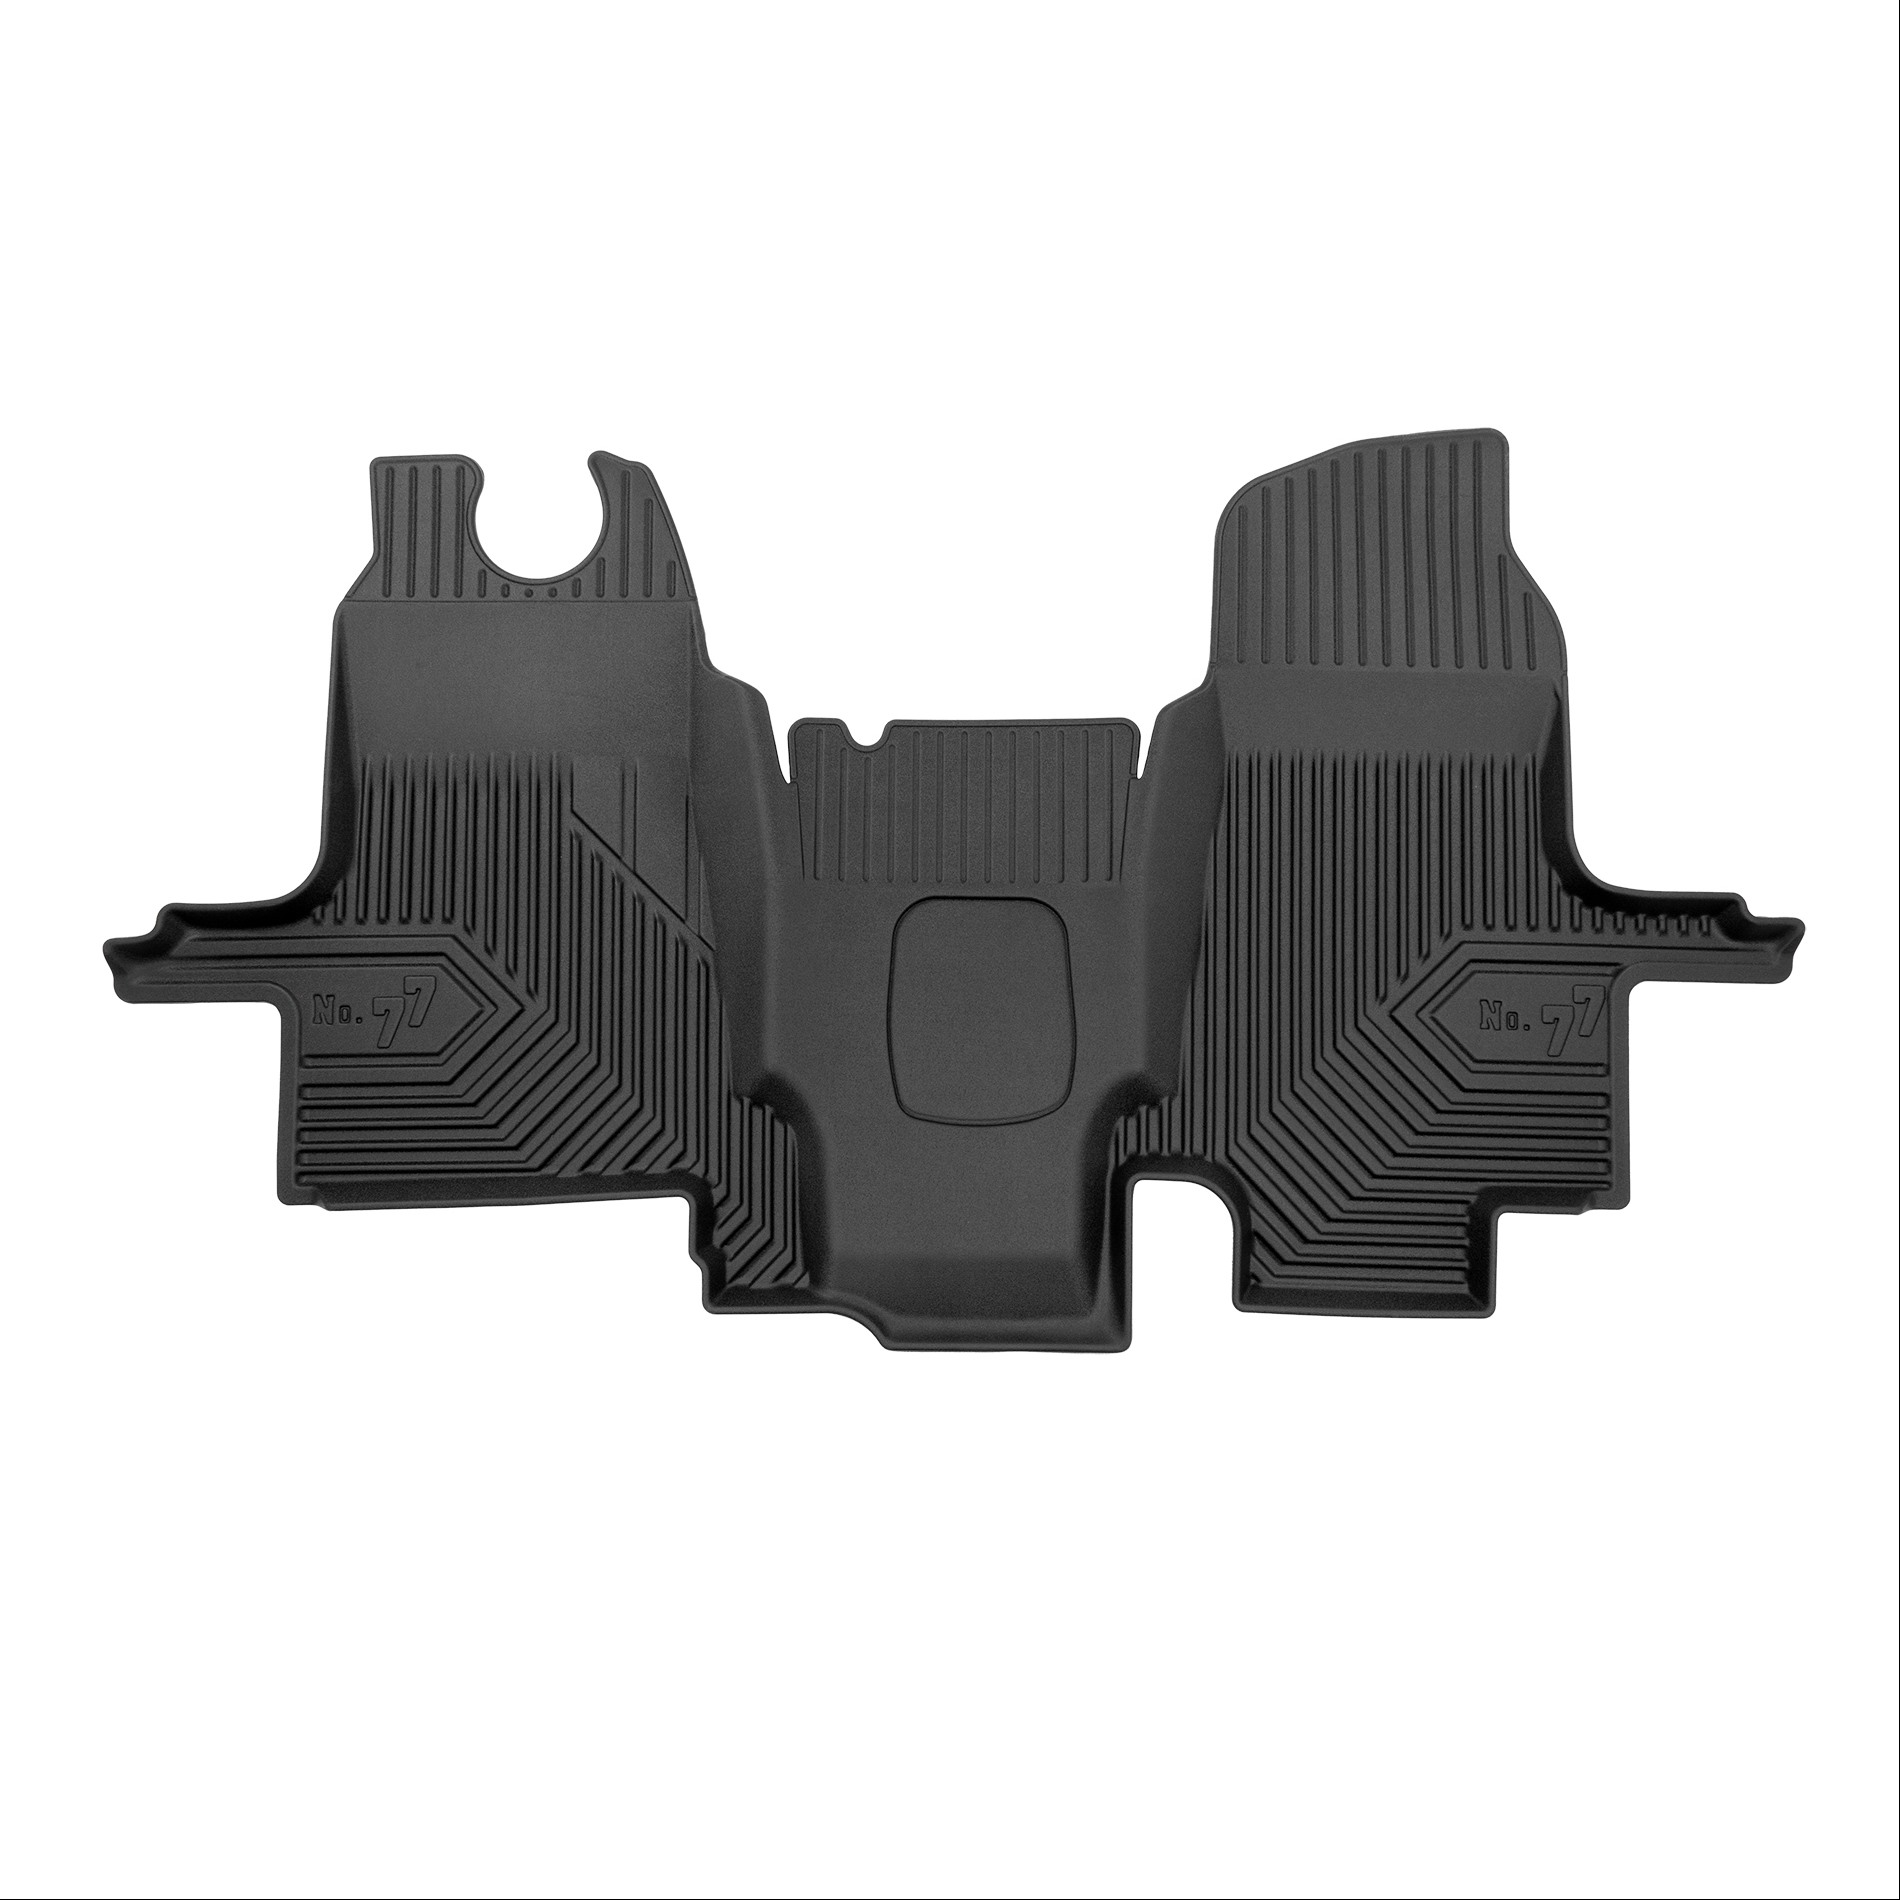 Car mats No77 for Ford Transit 2000-2013 1pc Frogum